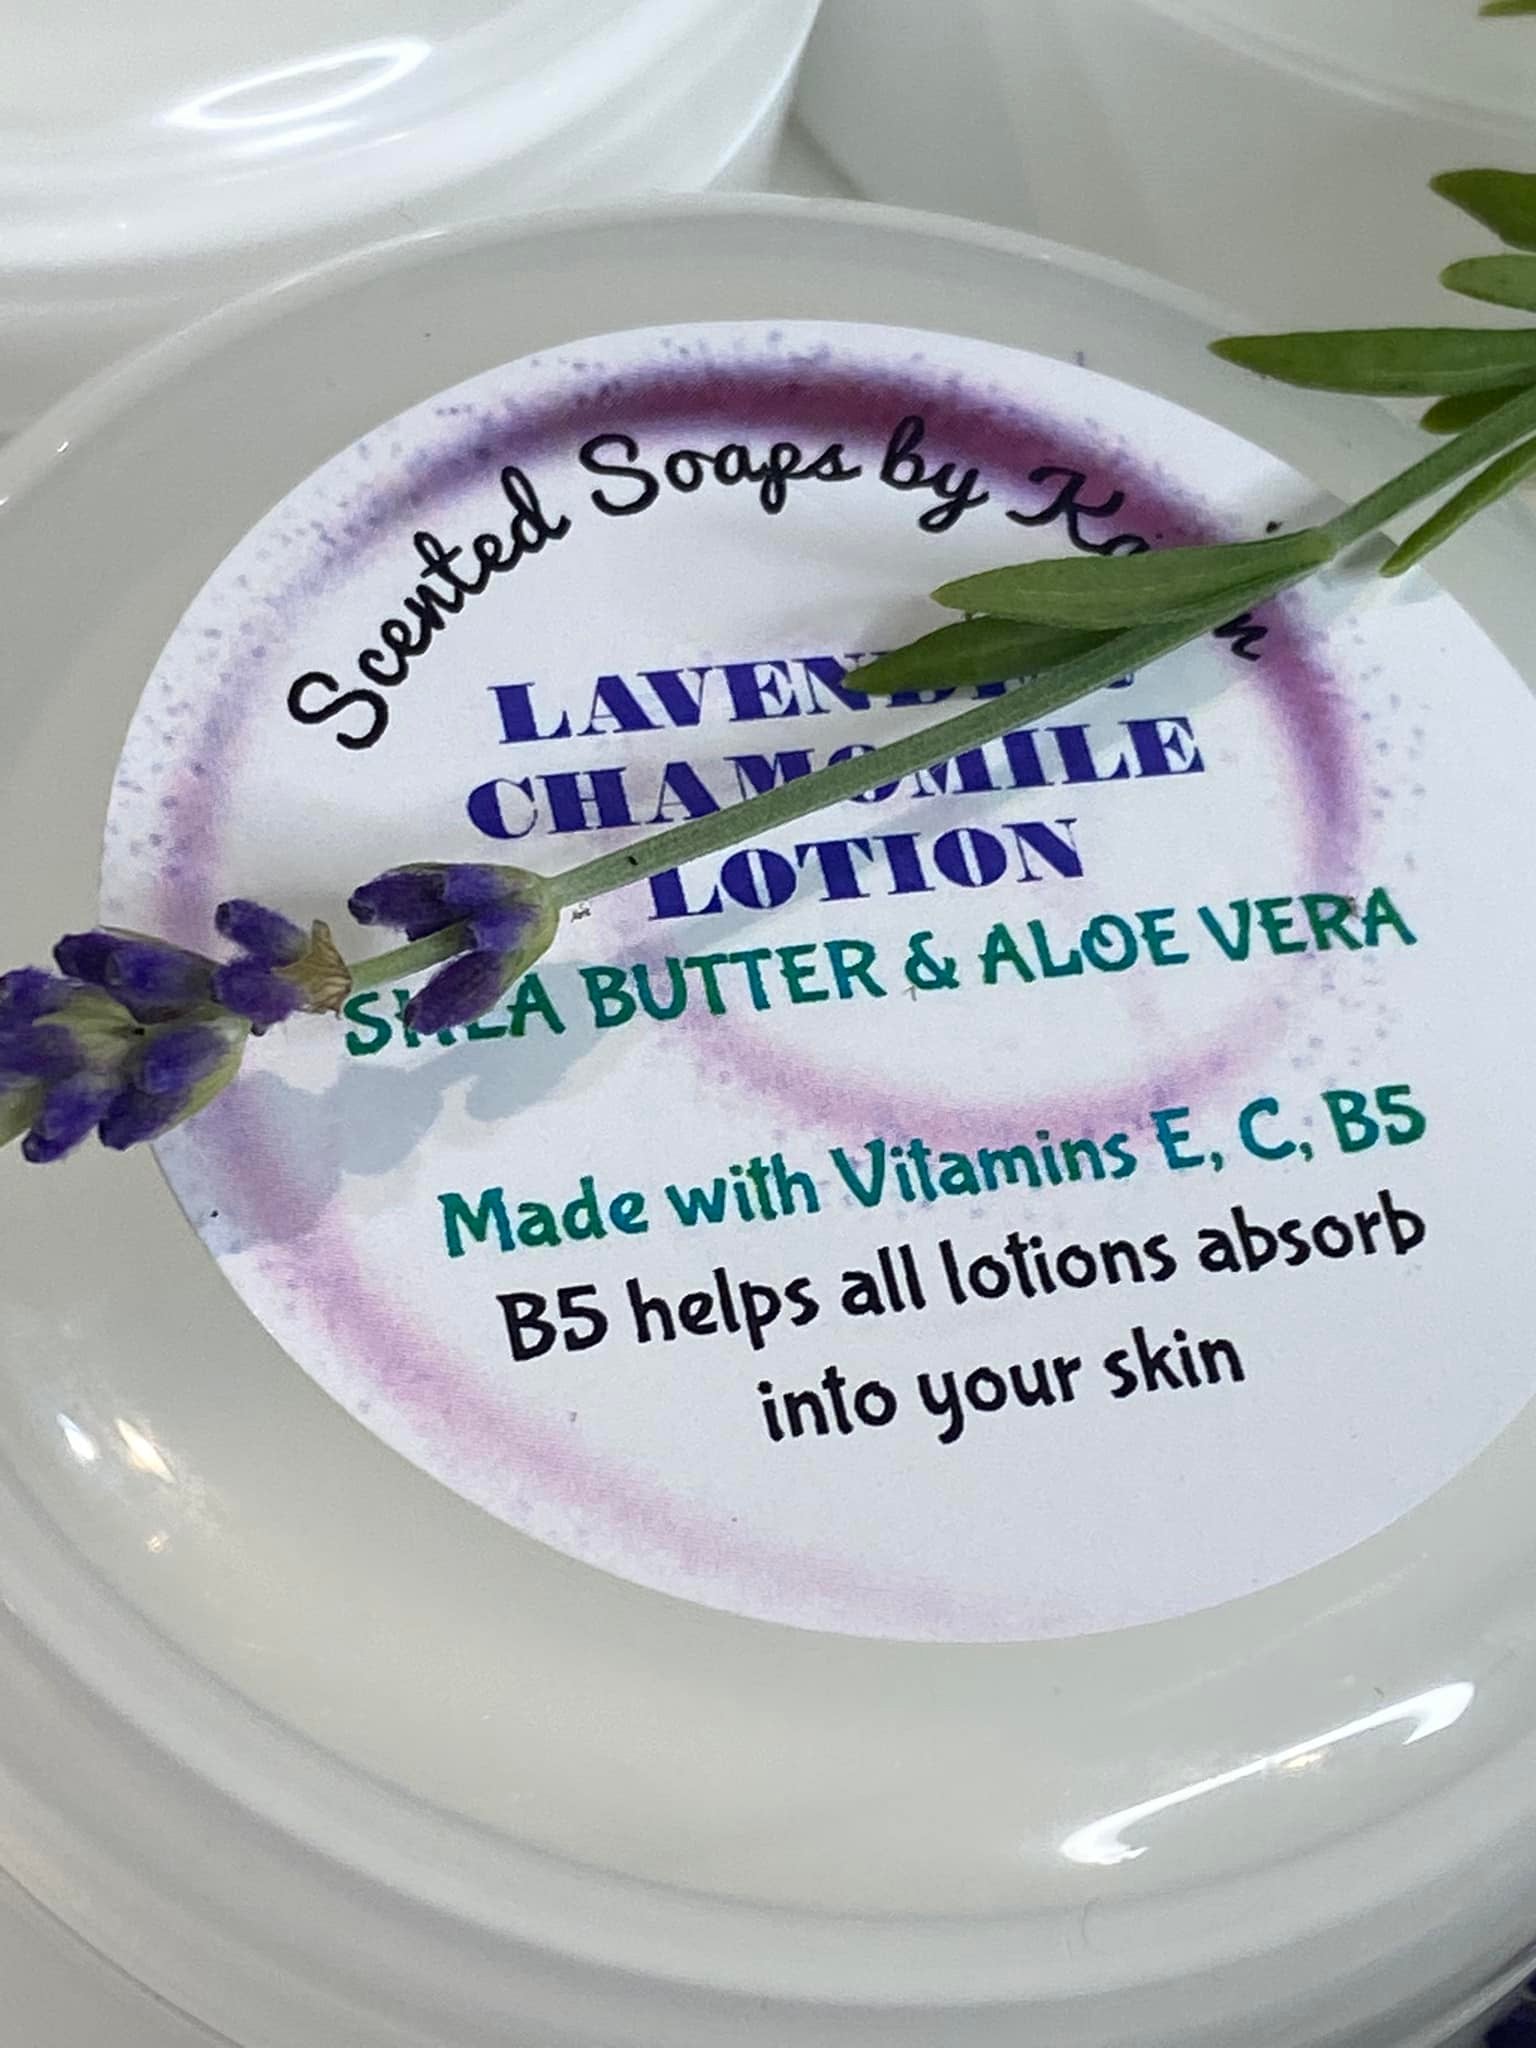 Lavender and Chamomile Lotion in NEW jars. I also add green tea, an antioxidant, and anti-inflammatory to name just a couple of benefits.